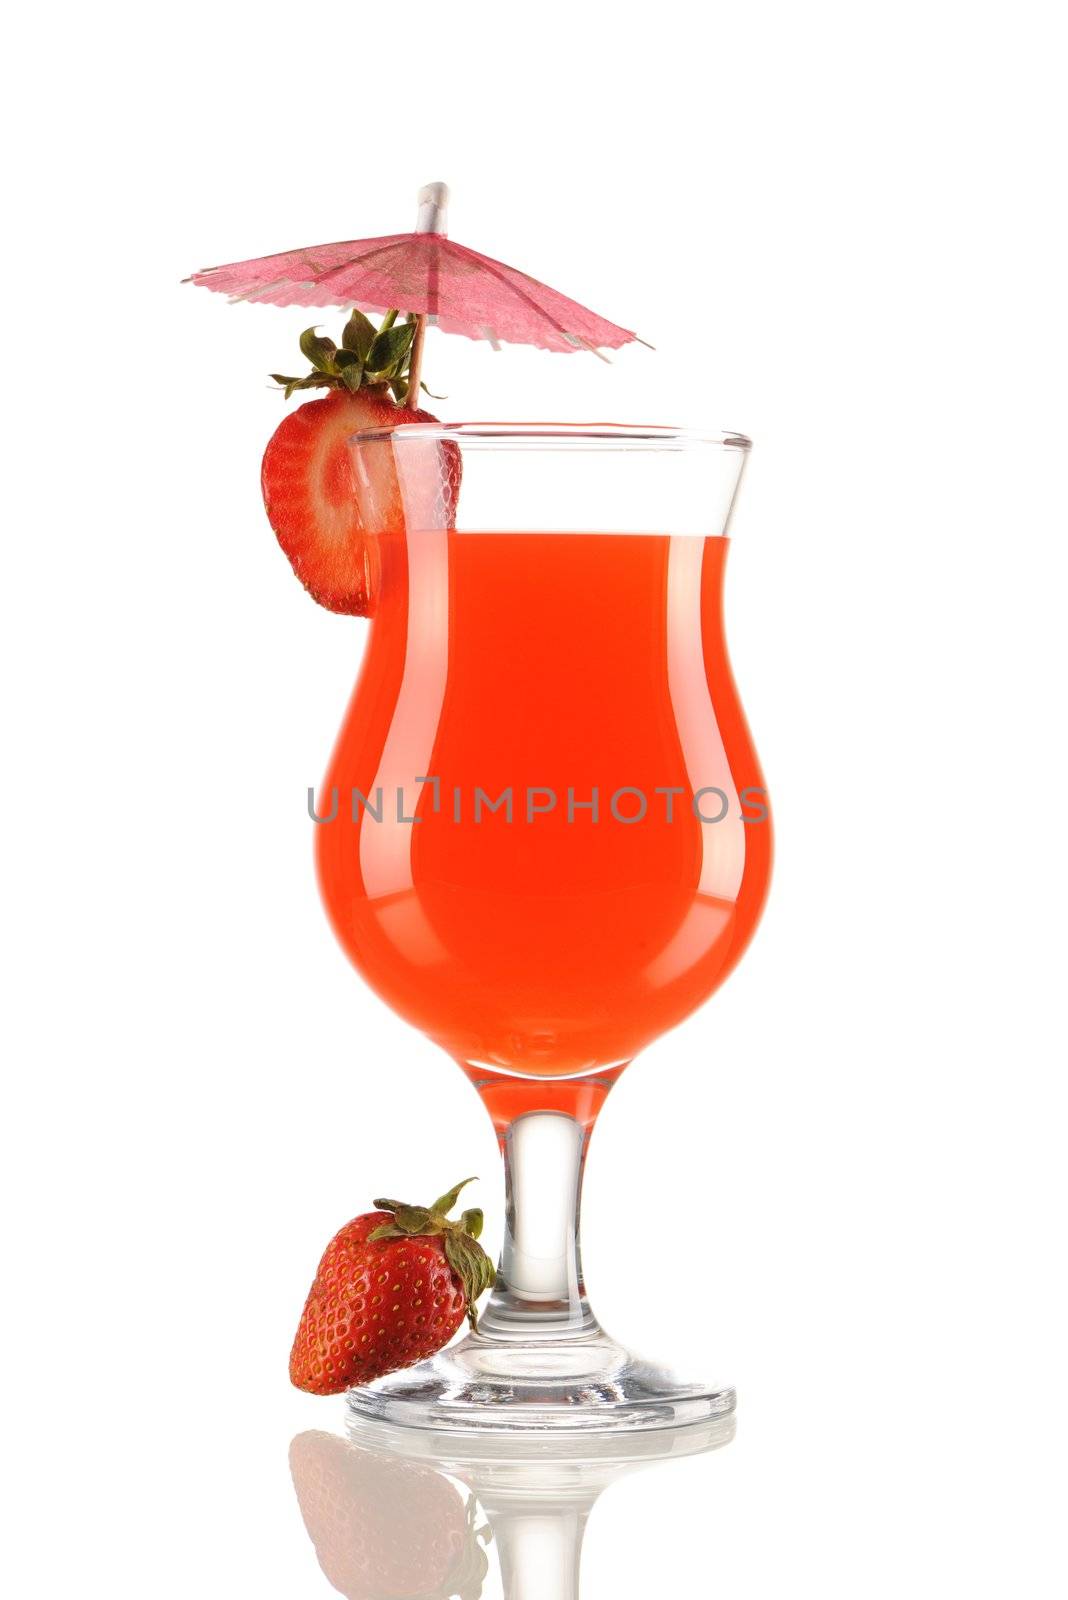 Cocktail with strawberry garnish isolated on white